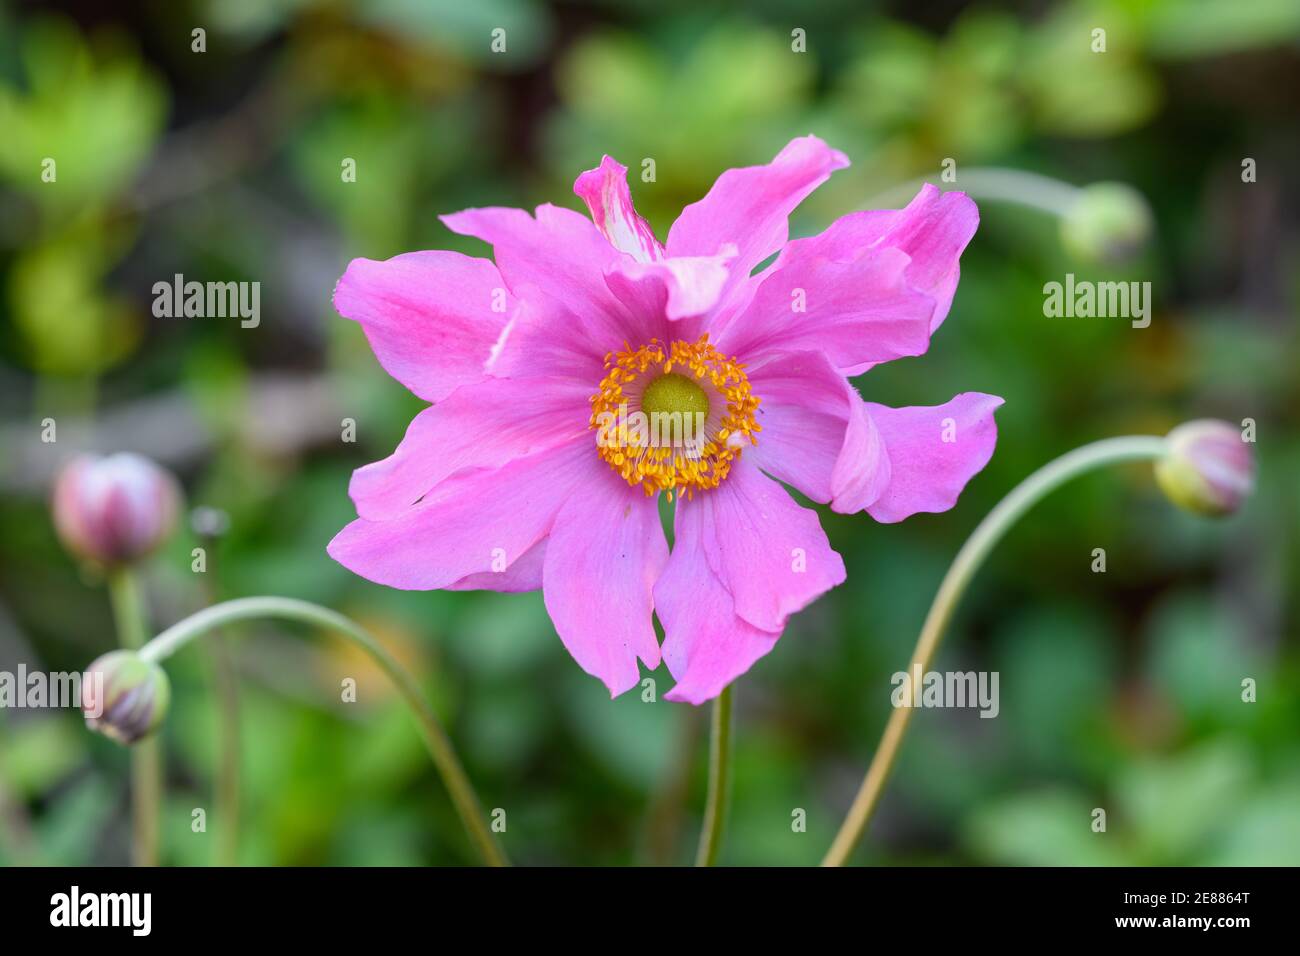 A close up view of a pink windflower Stock Photo